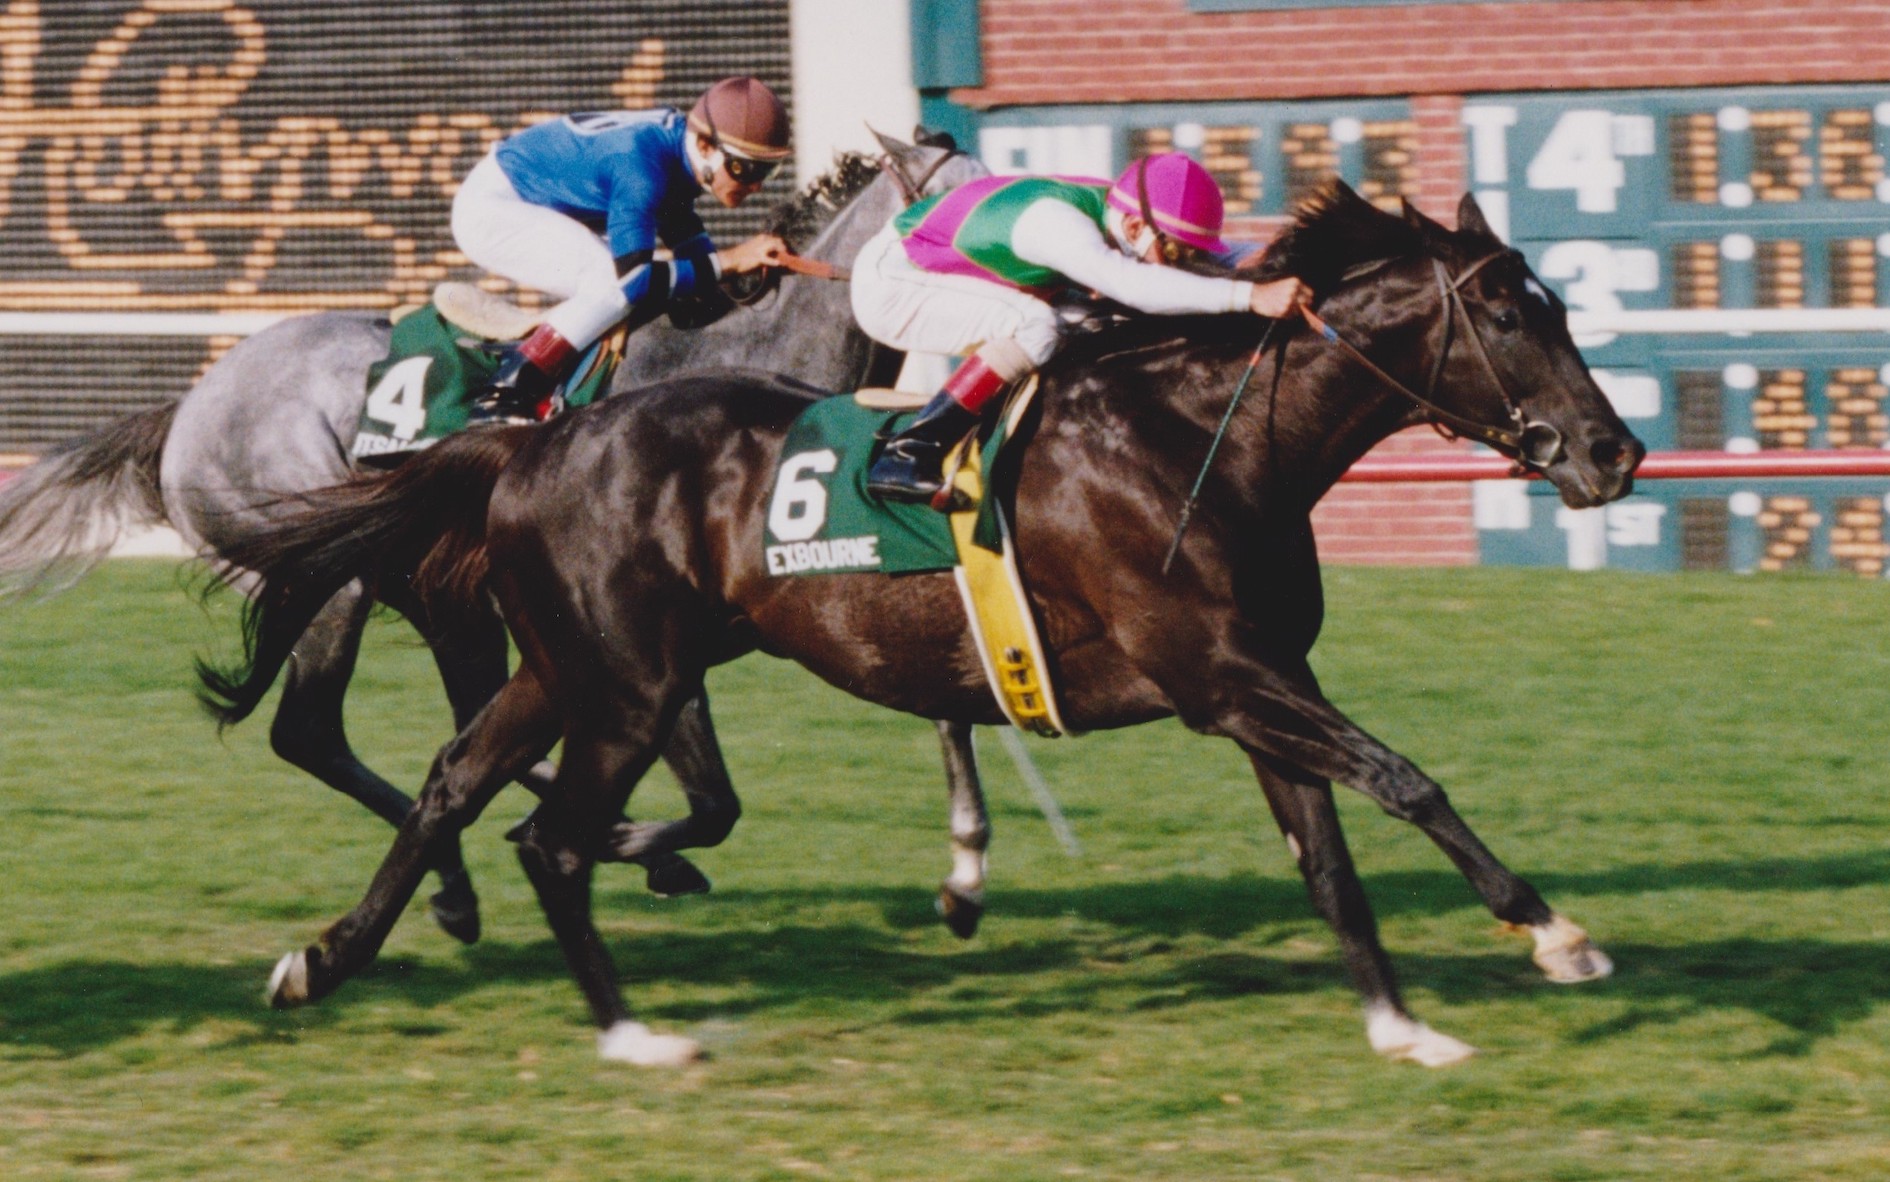 Neither champion Itsallgreektome nor Breeders' Cup winner Prized are a match for Exbourne in the 1991 Hollywood Turf Handicap. Photo: Stidham & Assoc., courtesy of Hollywood Park and provided by Edward Kip Hannan & Roberta Weiser